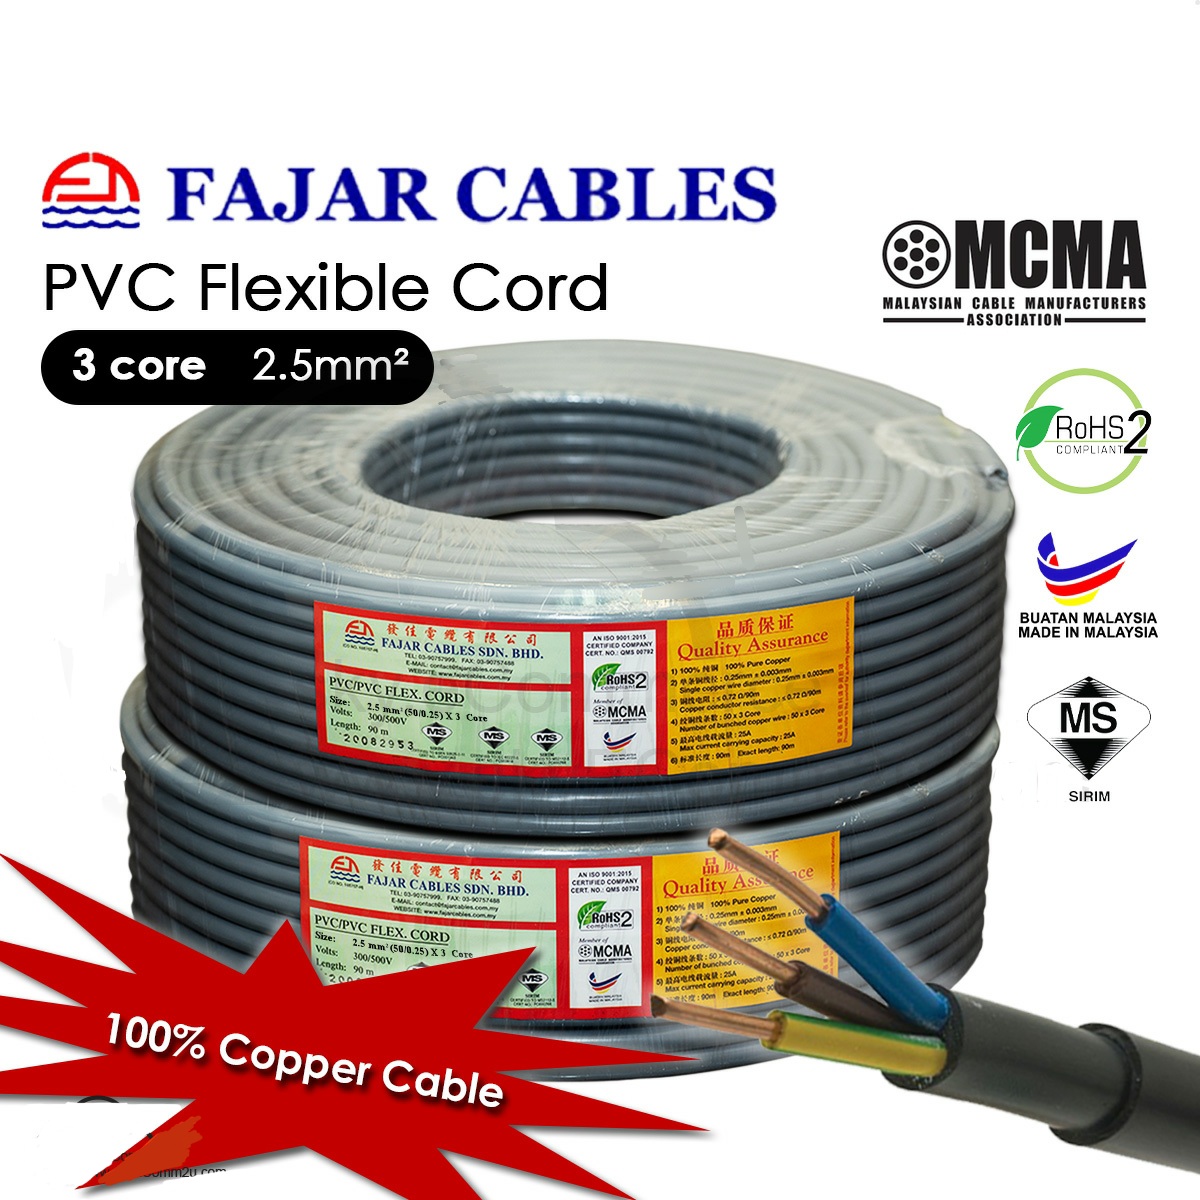 TSRC STORE | SAFETY CATEGORY (安全系列分类) - WIRE Cable (电器电線系列)